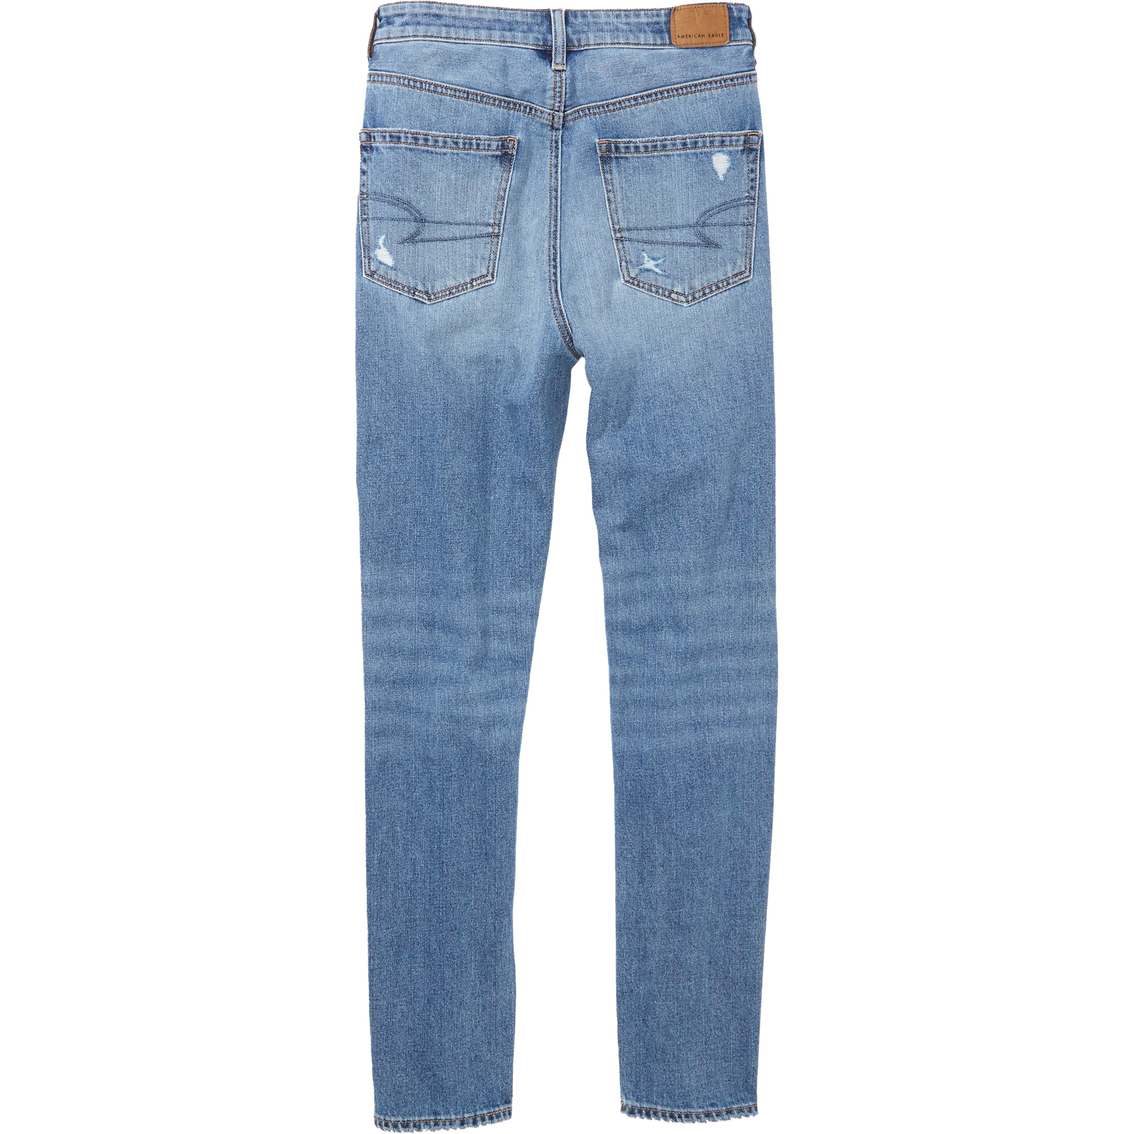 American Eagle Ripped Mom Jeans | Jeans | Clothing & Accessories | Shop ...